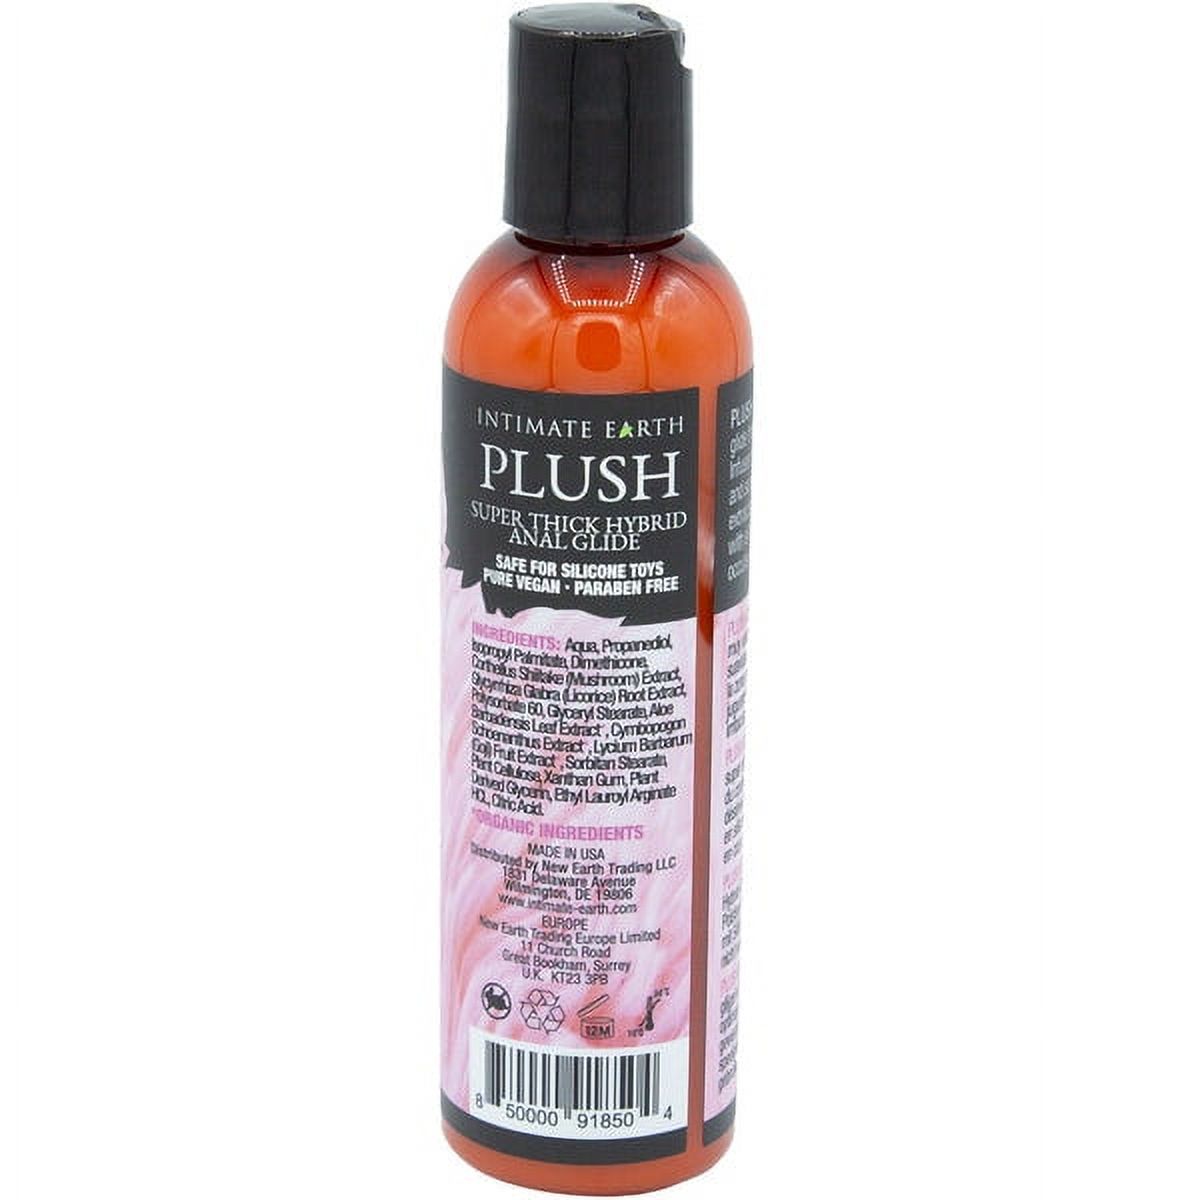 Intimate Earth Plush Super Thick Anal Glide 4oz/120ml - image 2 of 3